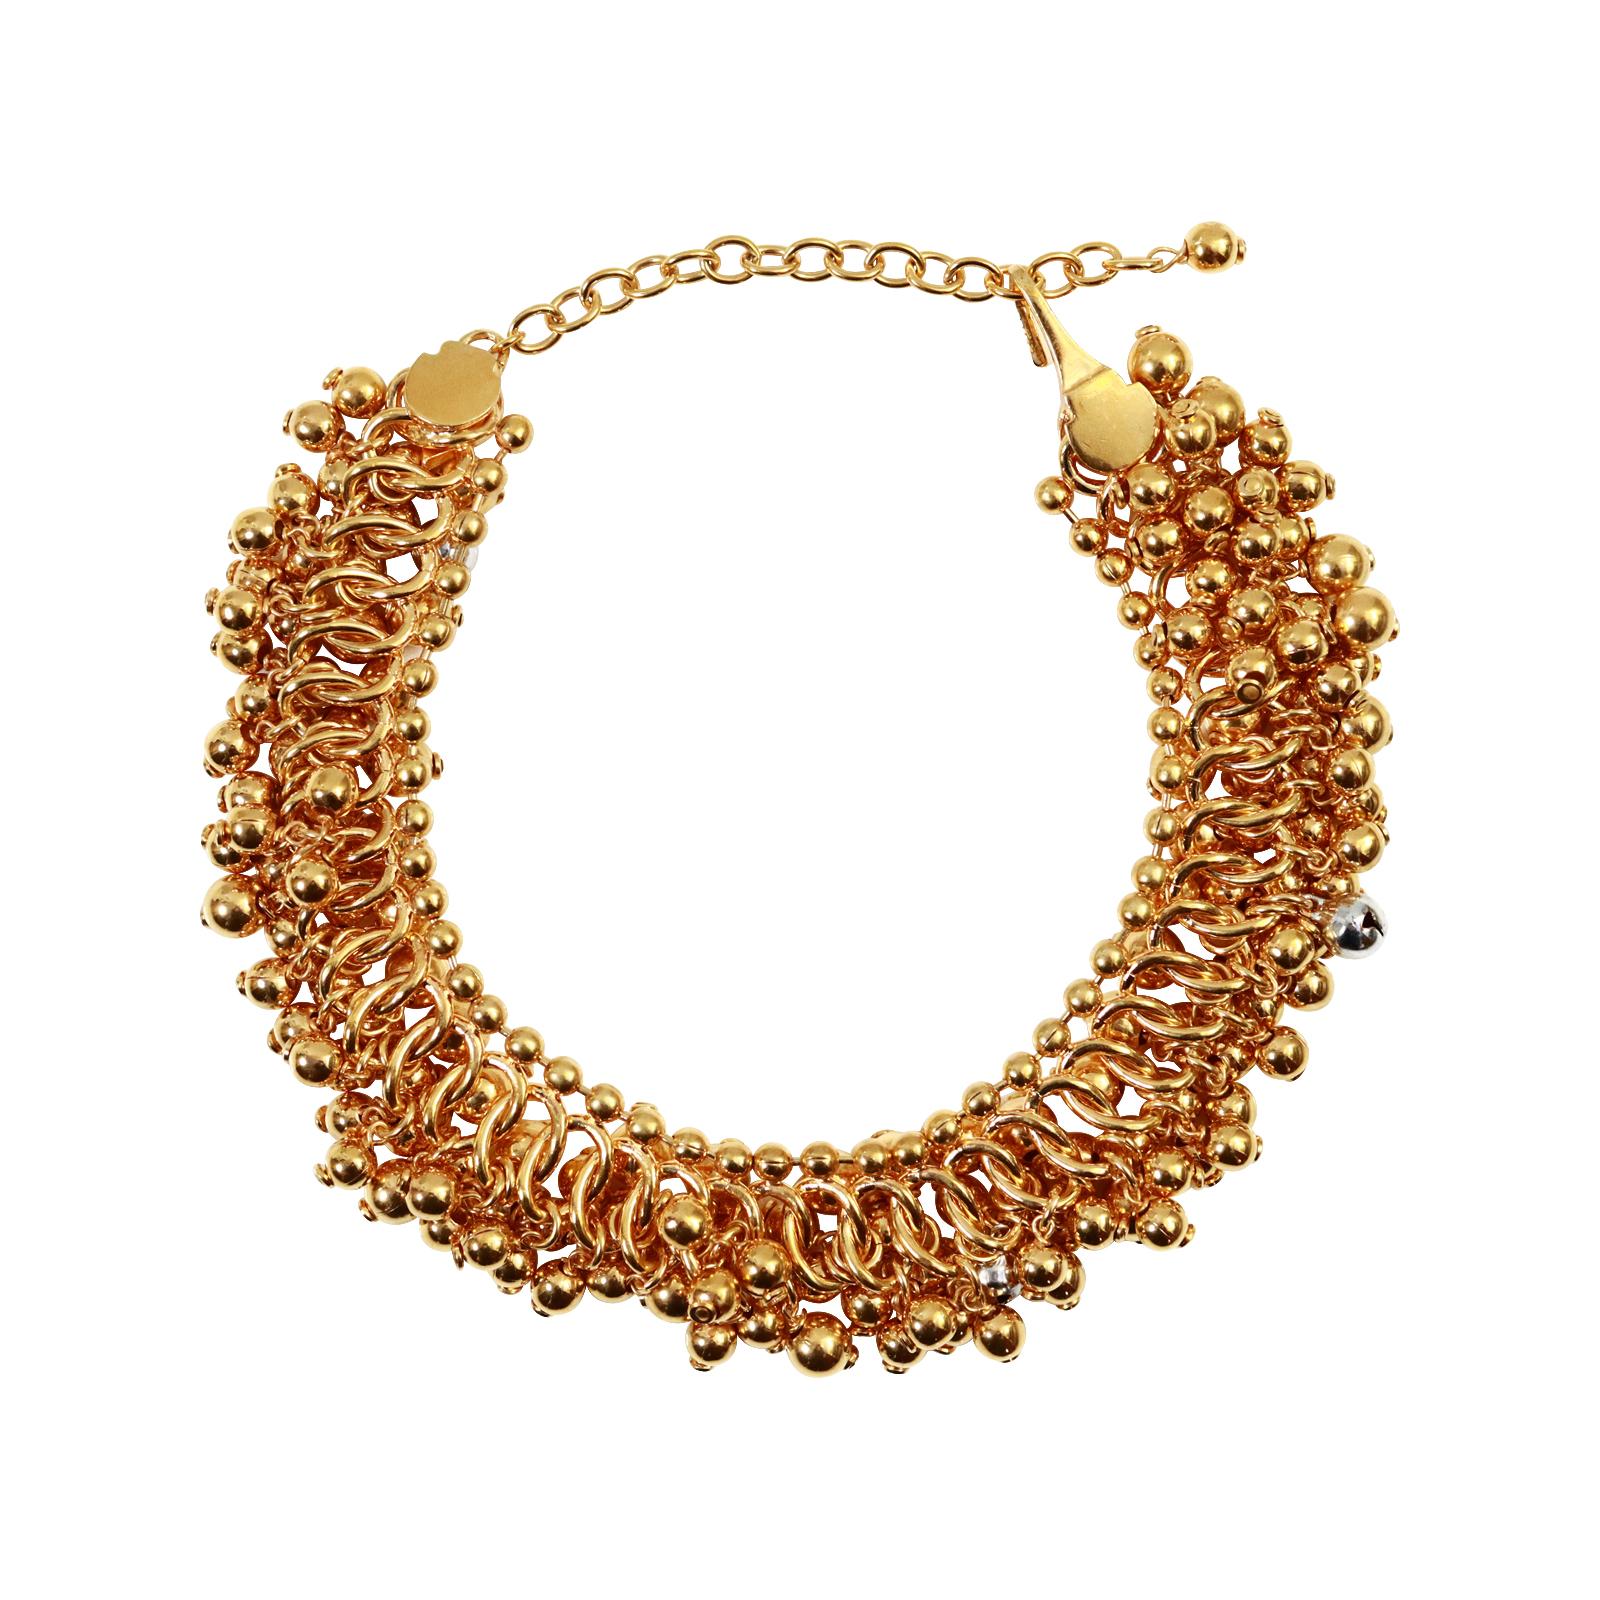 Modern Vintage Dior Gold Choker Necklace with Dangling Balls Circa 2000 For Sale